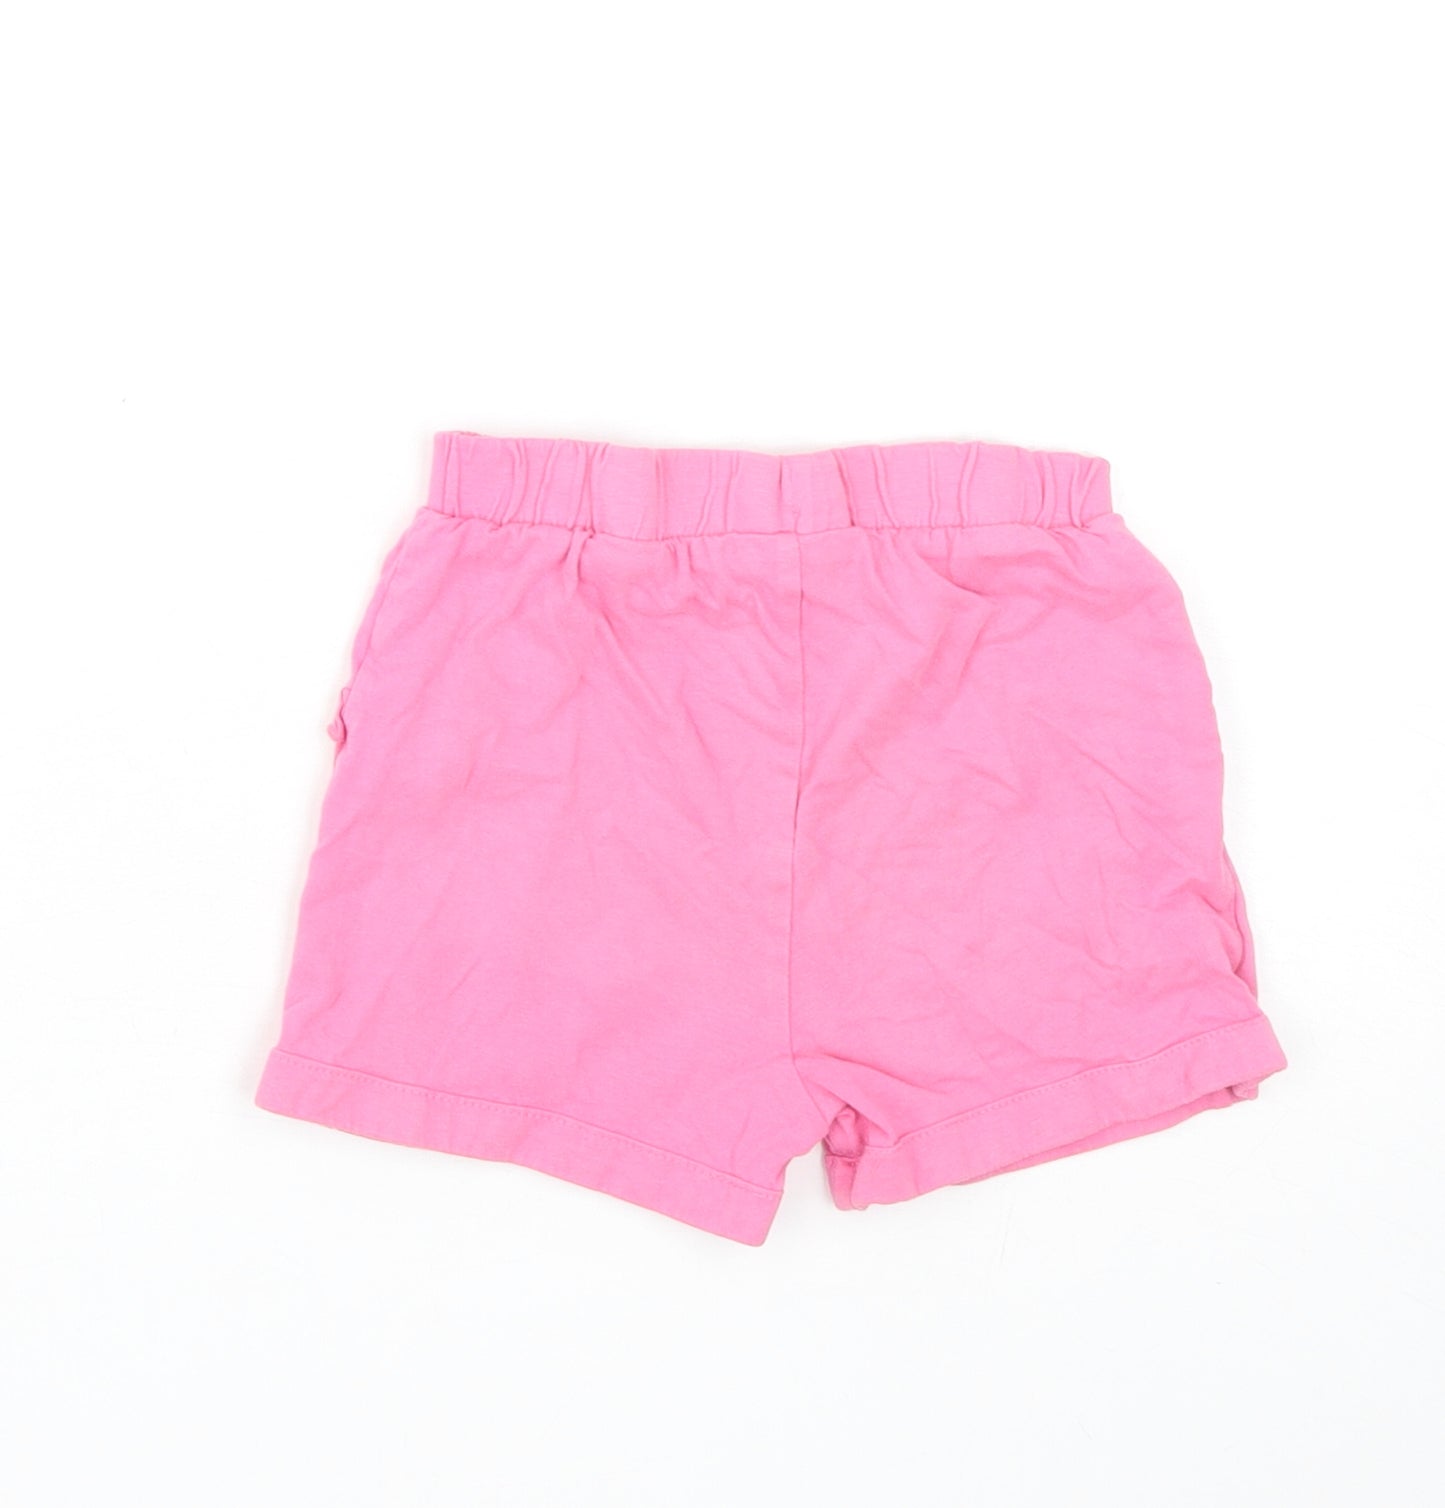 George Girls Pink Cotton Sweat Shorts Size 2-3 Years L3 in Regular